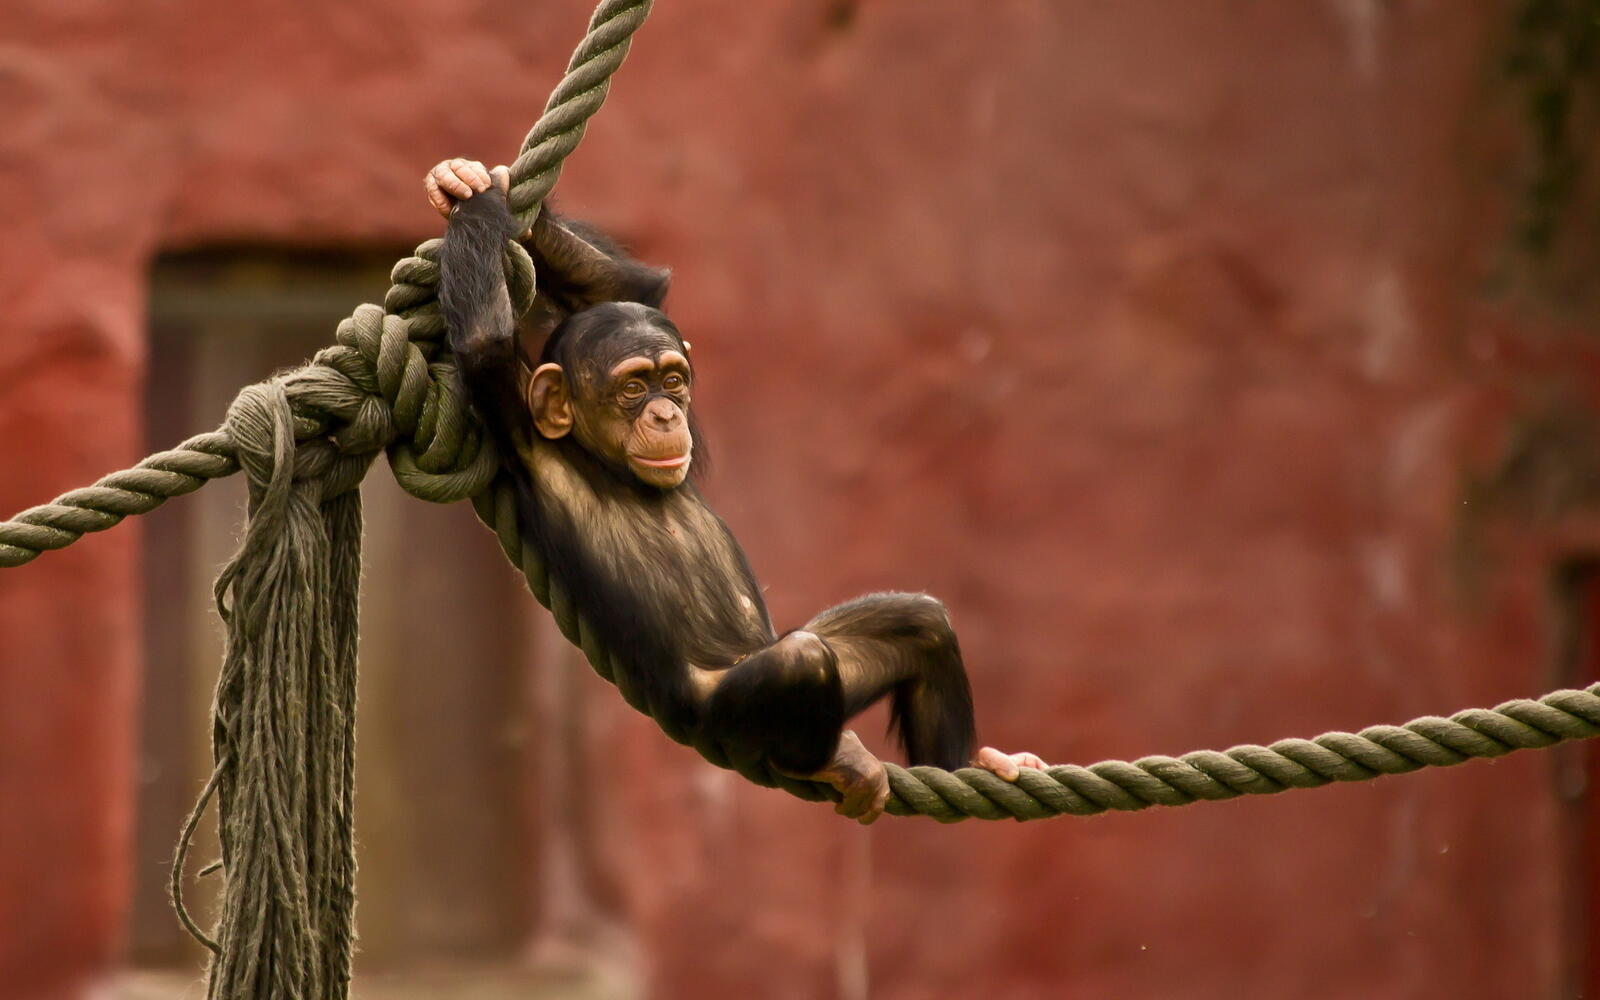 Wallpapers monkey cub rope on the desktop